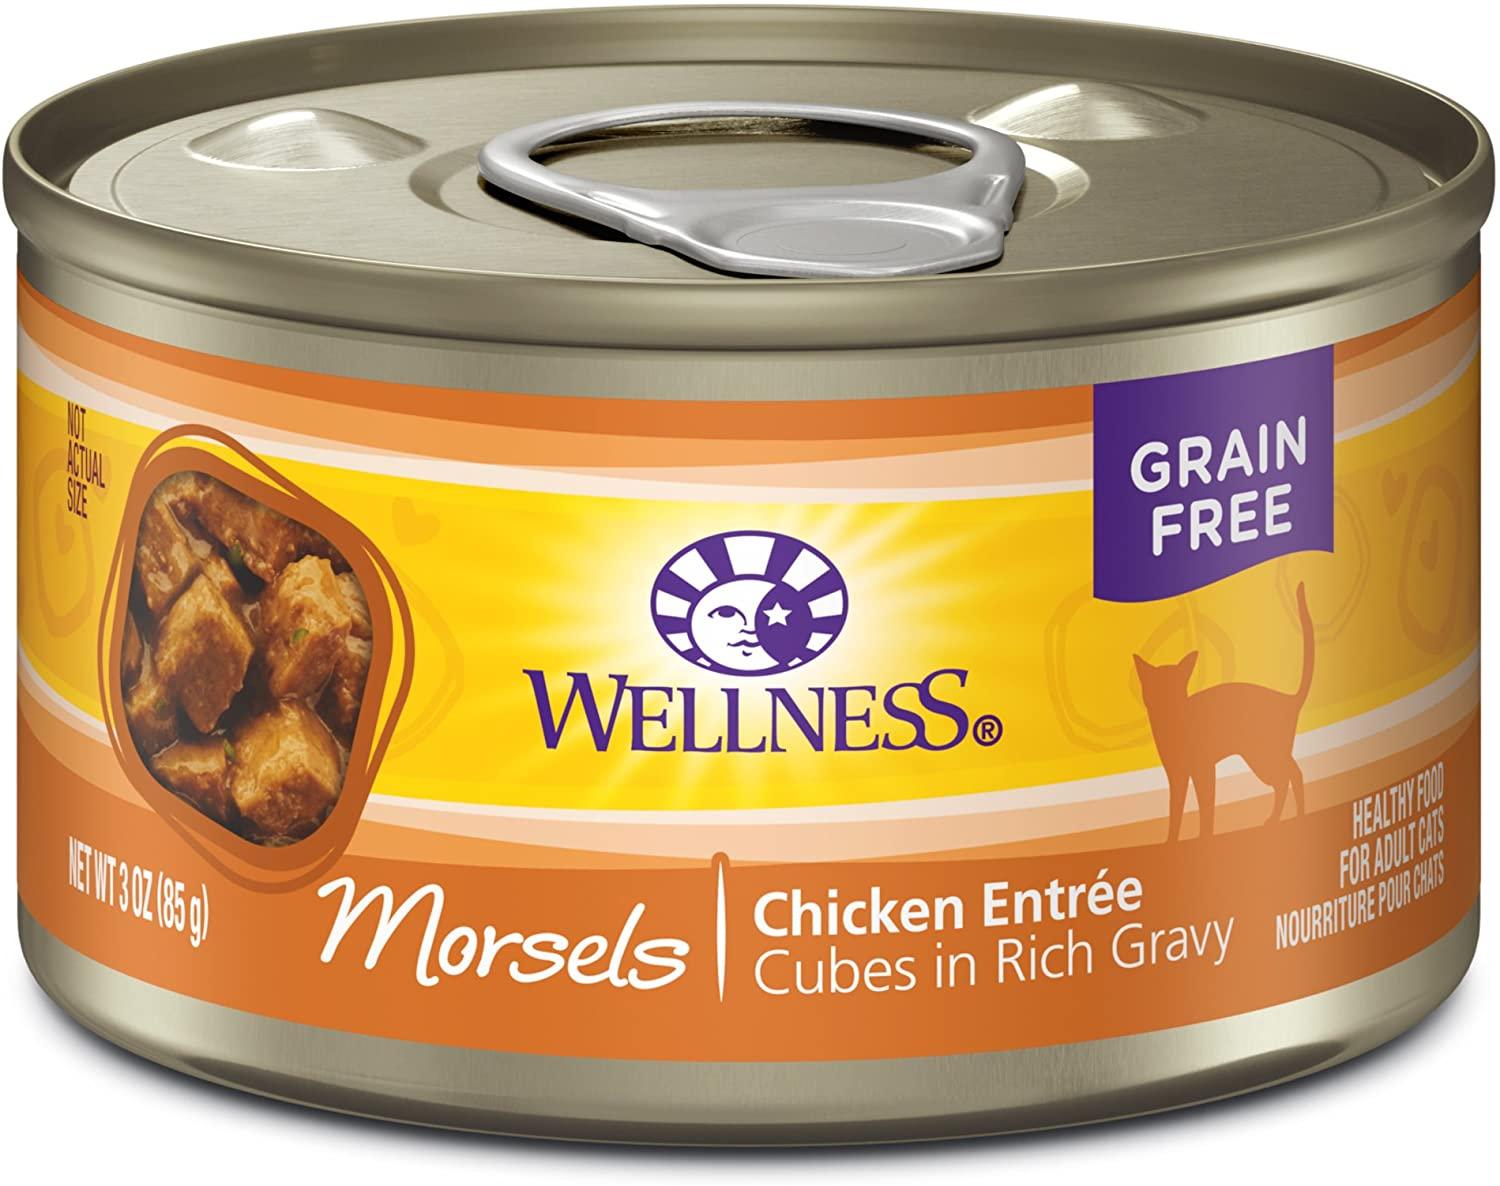 24 Wellness Morsels Grain-Free Canned Cat Food for $13.99 Shipped